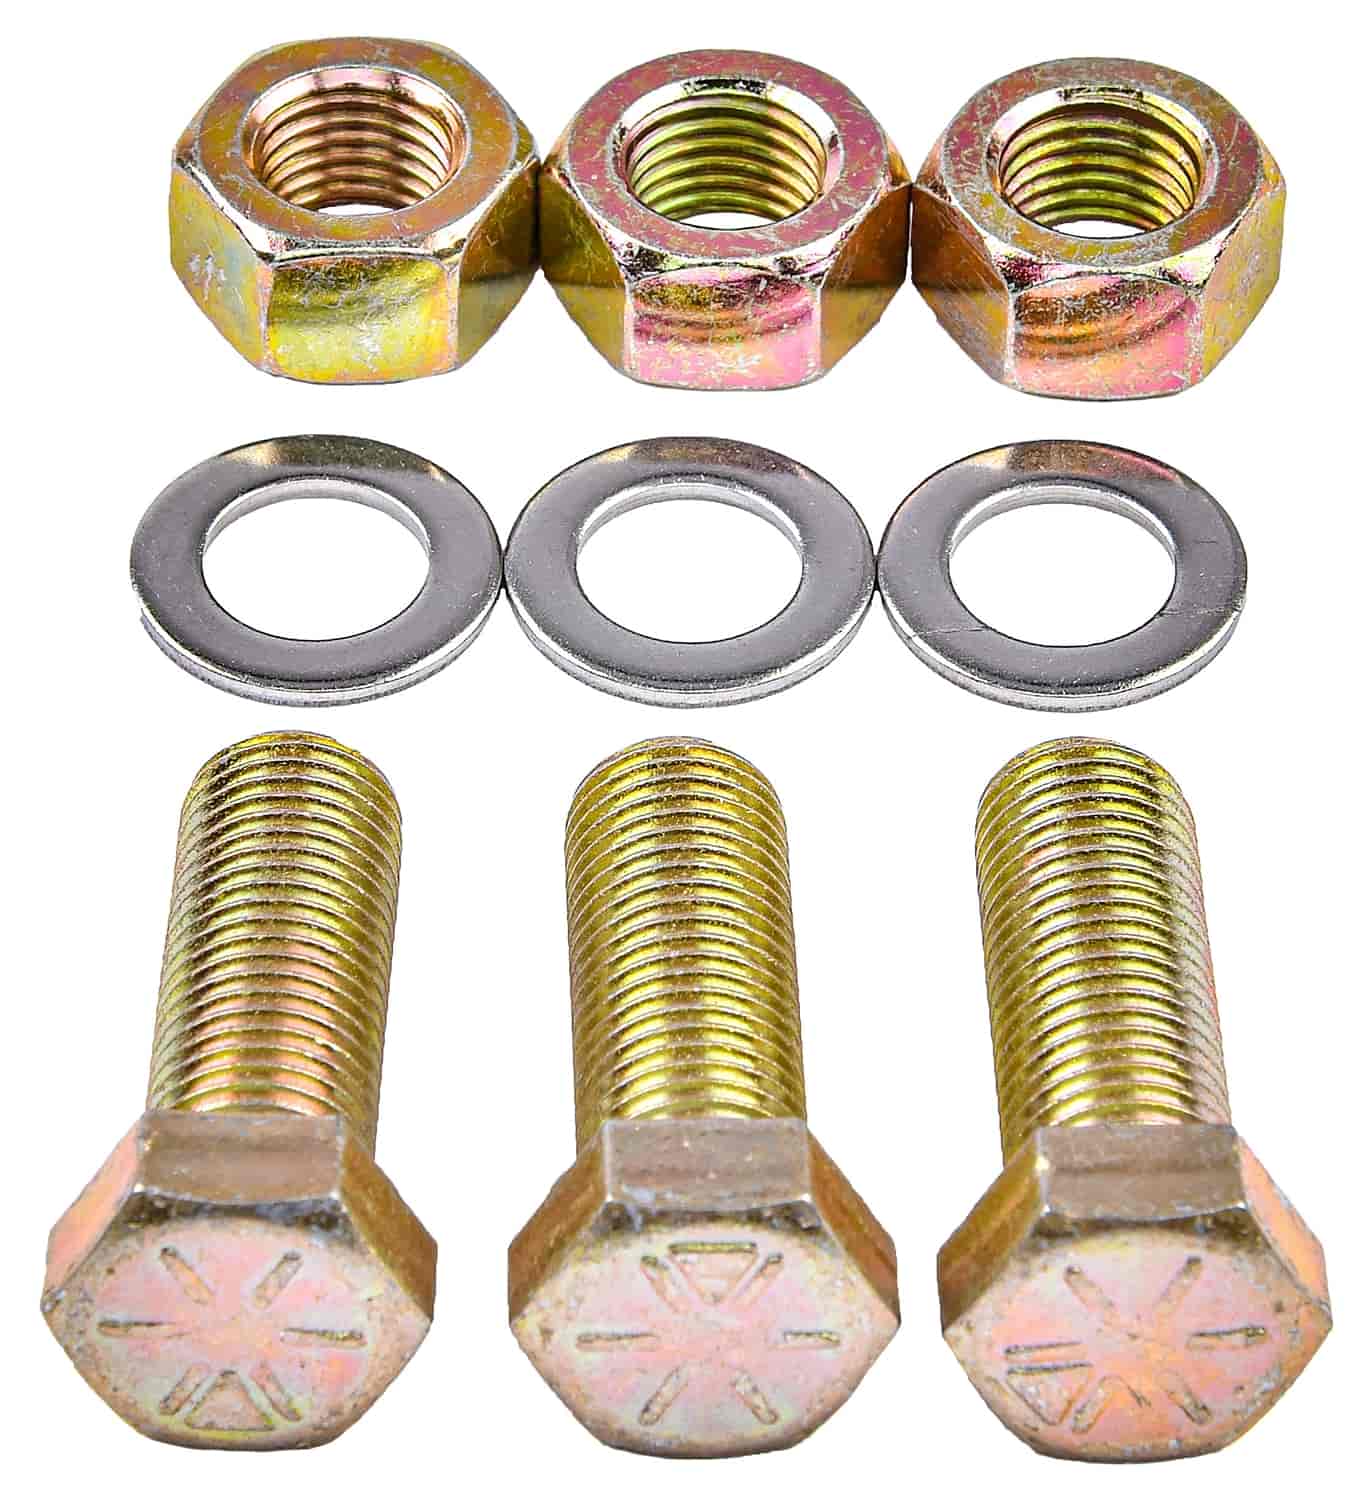 JEGS 82503 Torque Converter Bolts Fits 8 in. Diameter Race Converters Grade 8 In - image 2 of 2